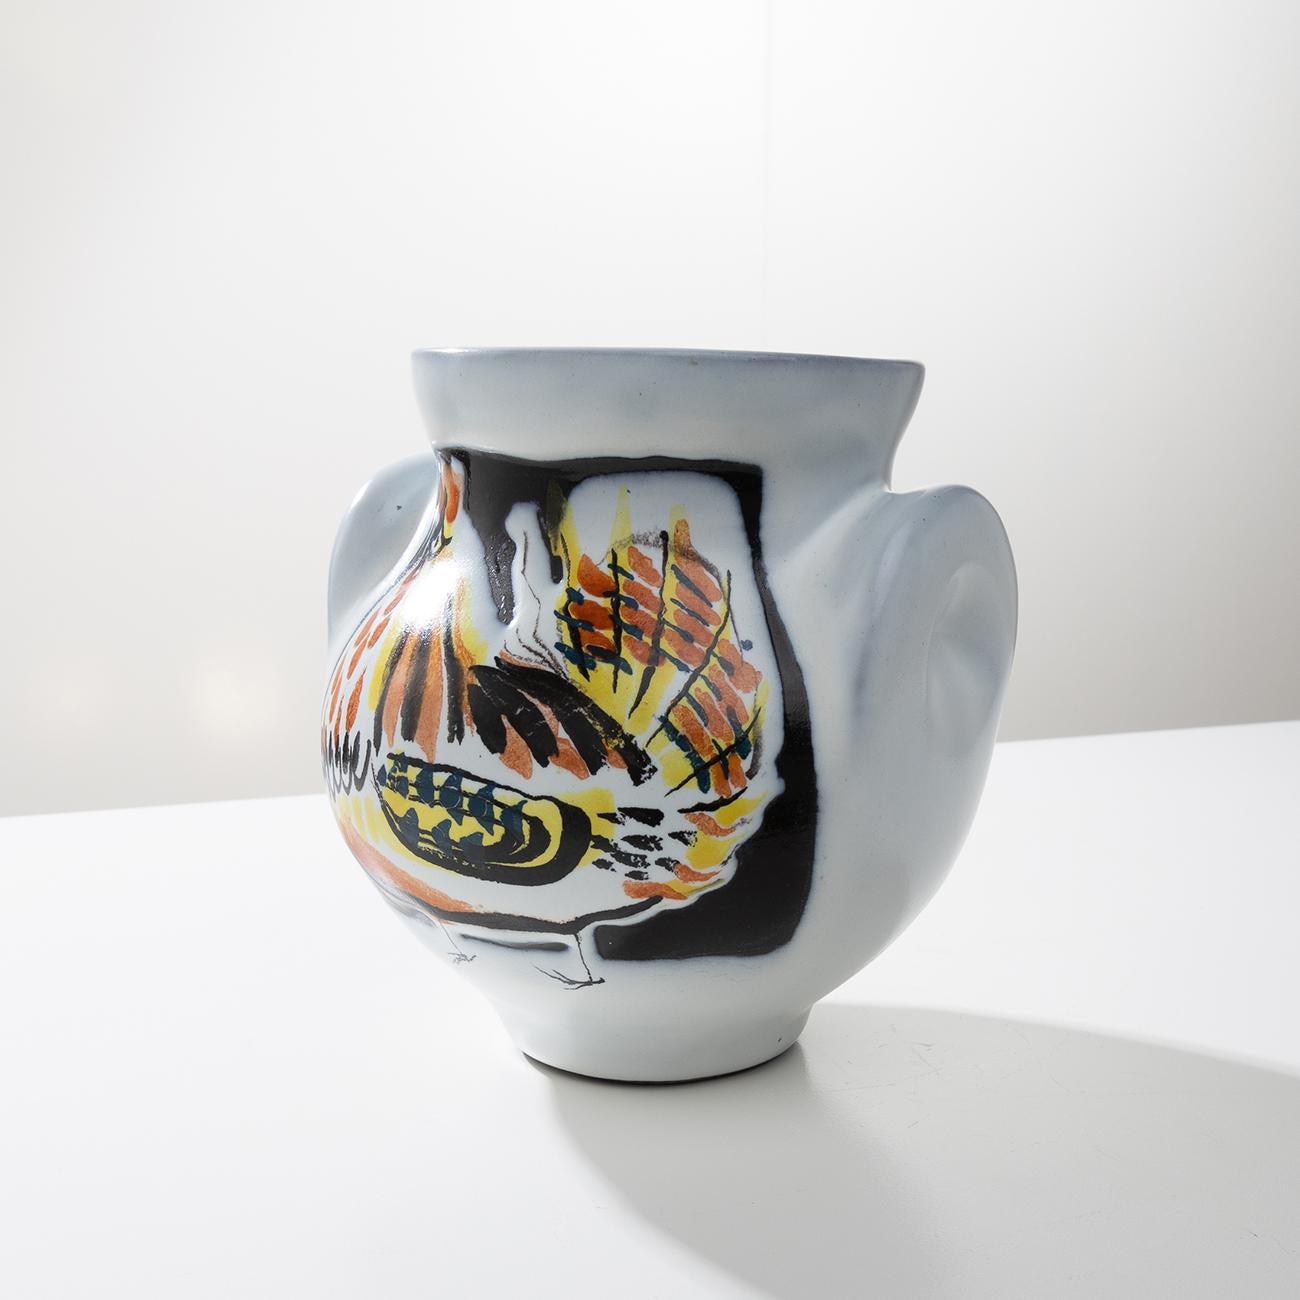 Very beautiful and rare vase (so-called ears model) by Roger Capron in white glazed ceramic with a rooster decoration made entirely by hand. The drawing of different colors, orange red, yellow and black on the white background.
Probably made around